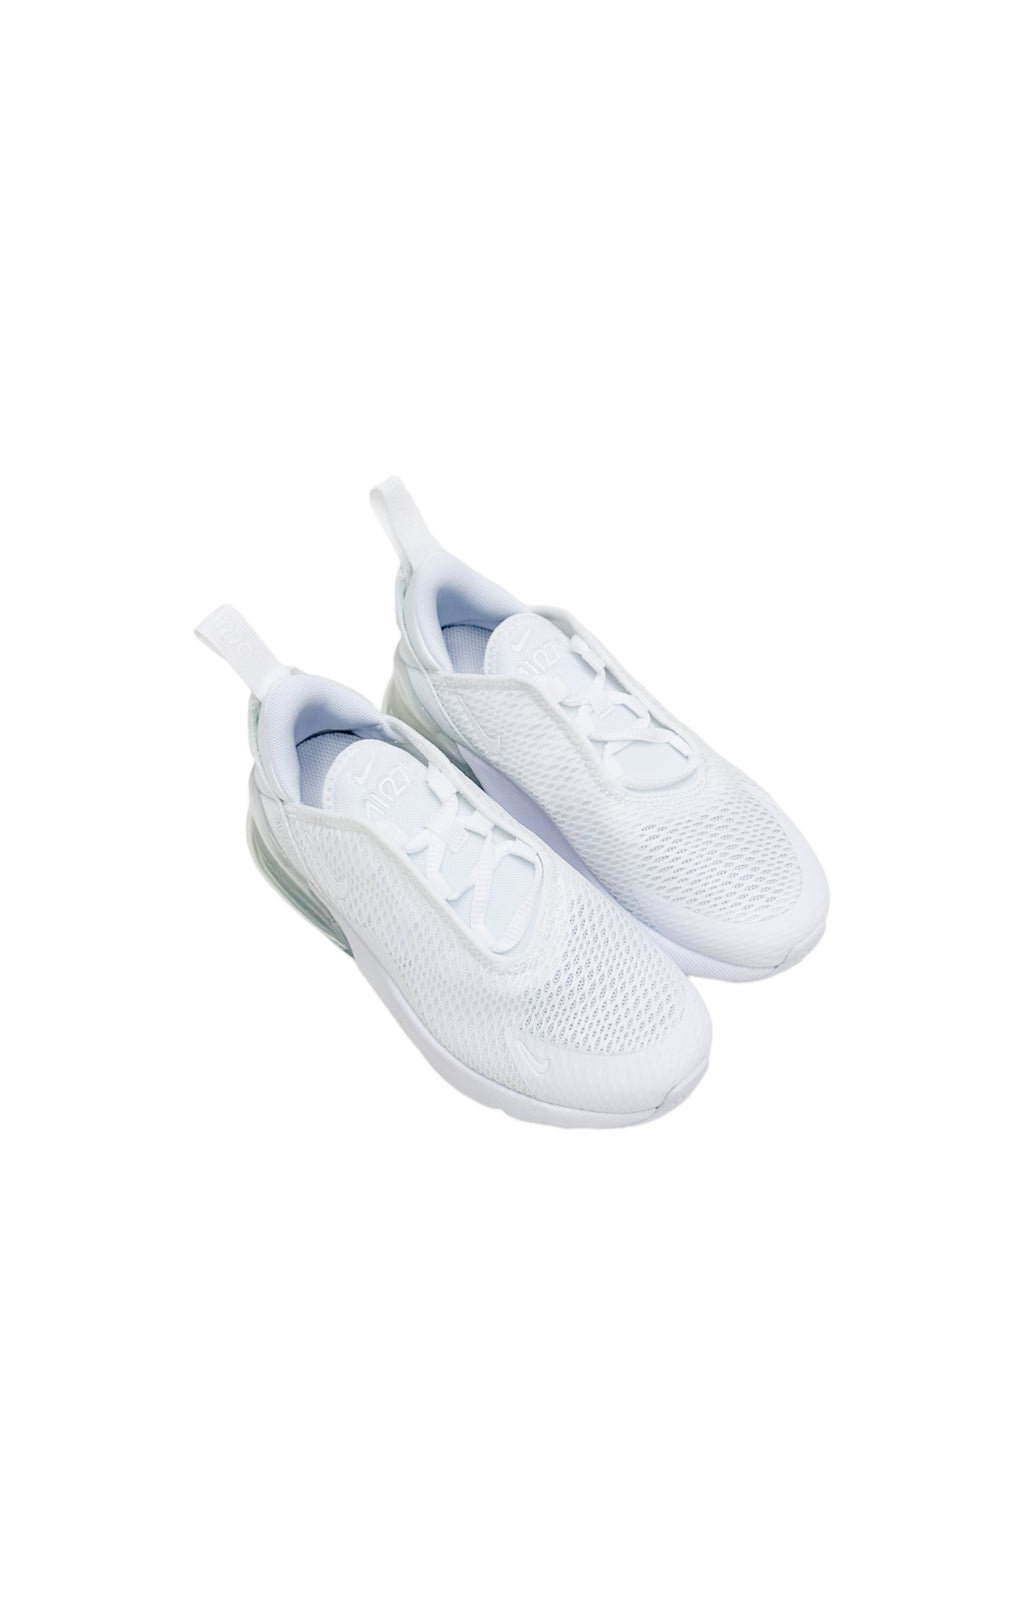 NIKE (NEW) Sneakers Size: Toddler US 12.5C